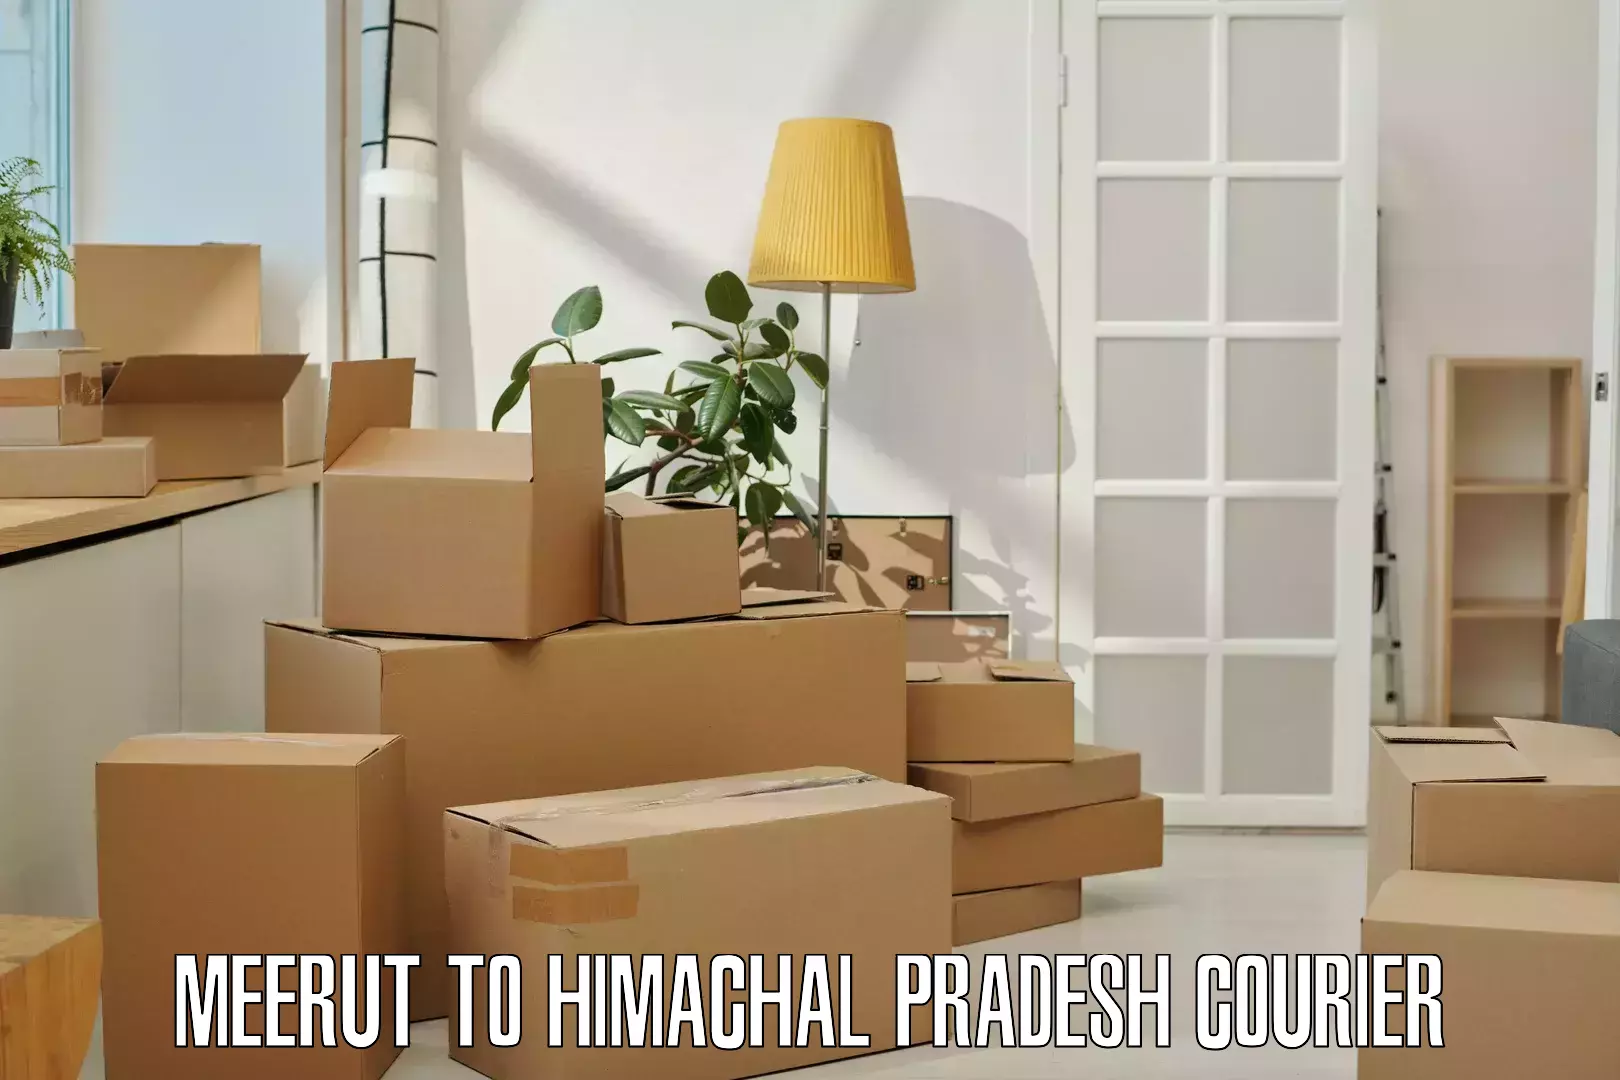 On-call courier service Meerut to Rampur Bushahr